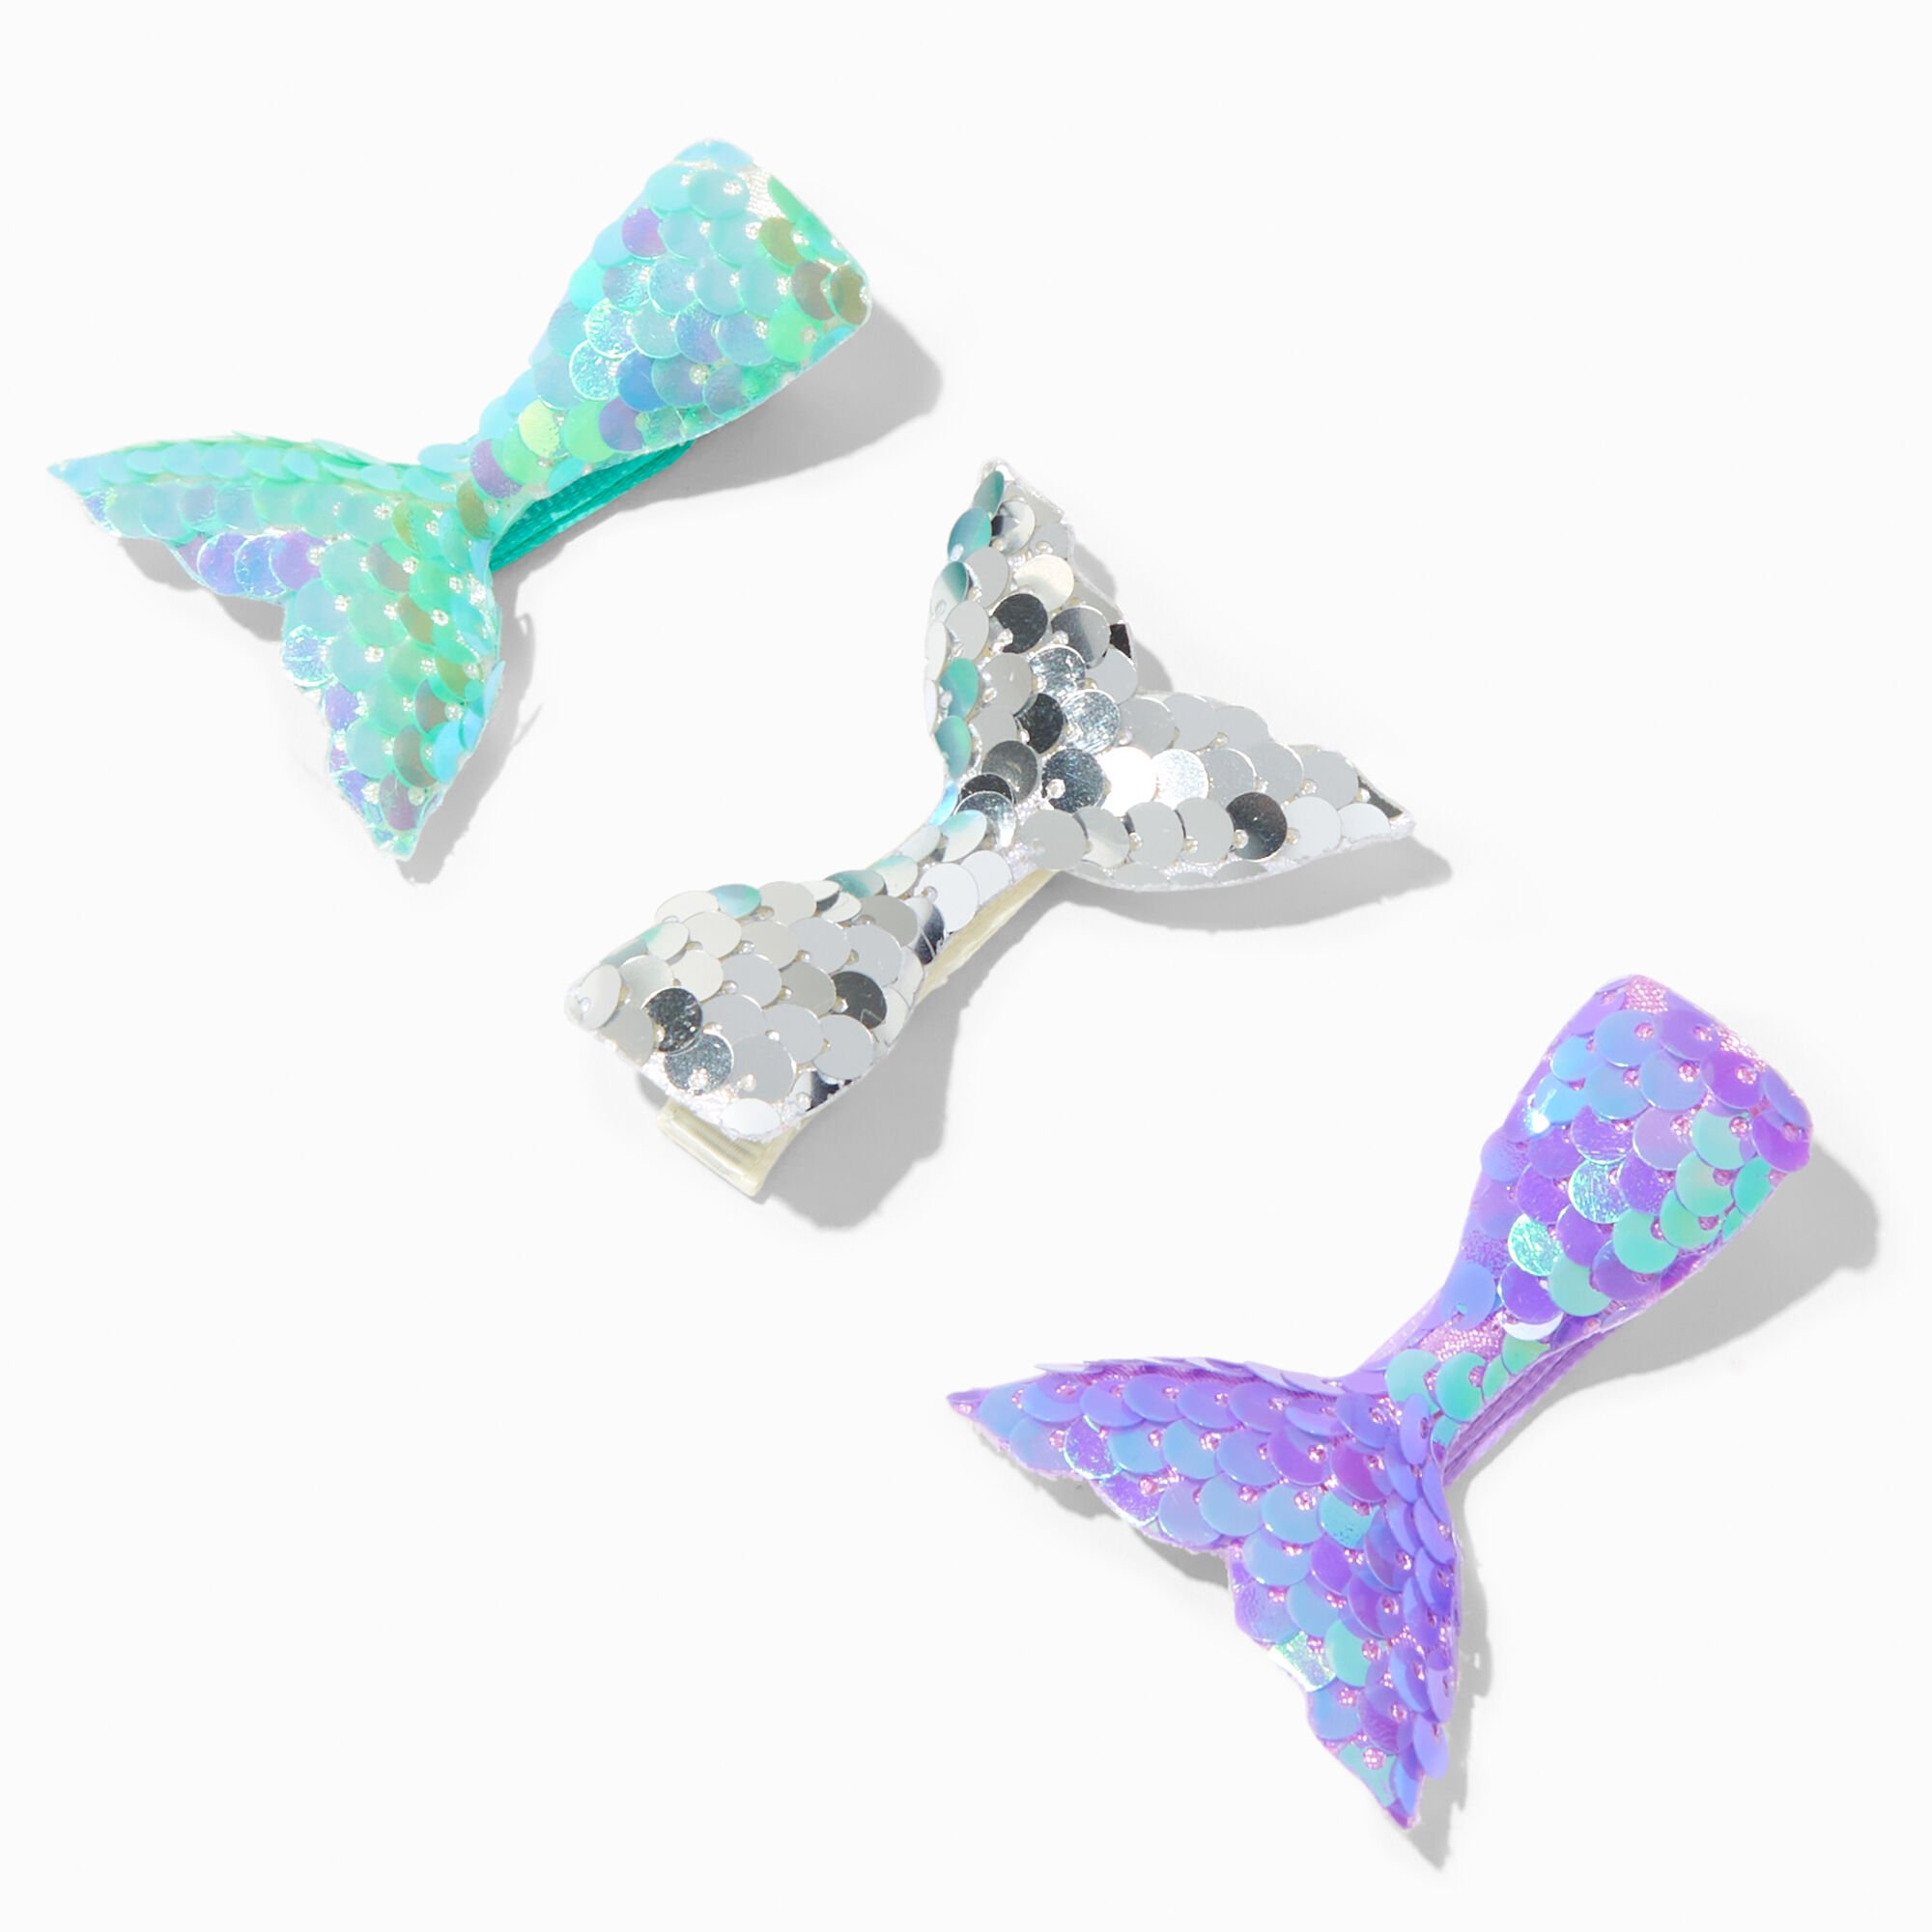 View Claires Club Sequin Mermaid Tail Hair Clips 3 Pack information